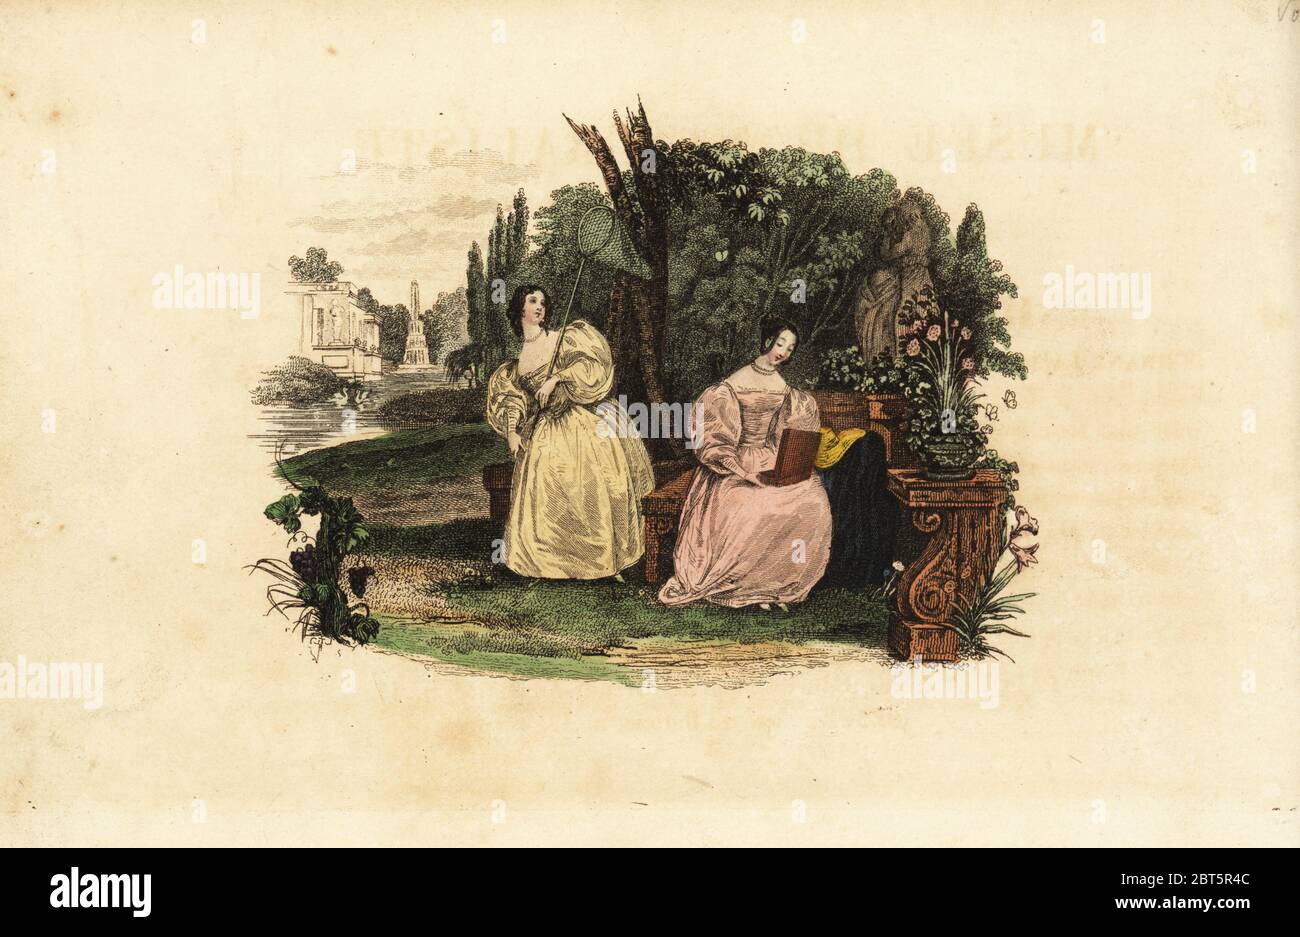 Women entomologists catching butterflies in a garden, mid 19th century. Handcoloured lithograph from Musee du Naturaliste dedie a la Jeunesse, Histoire des Papillons, Hippolyte and Polydor Pauquet, Paris, 1833. Stock Photo